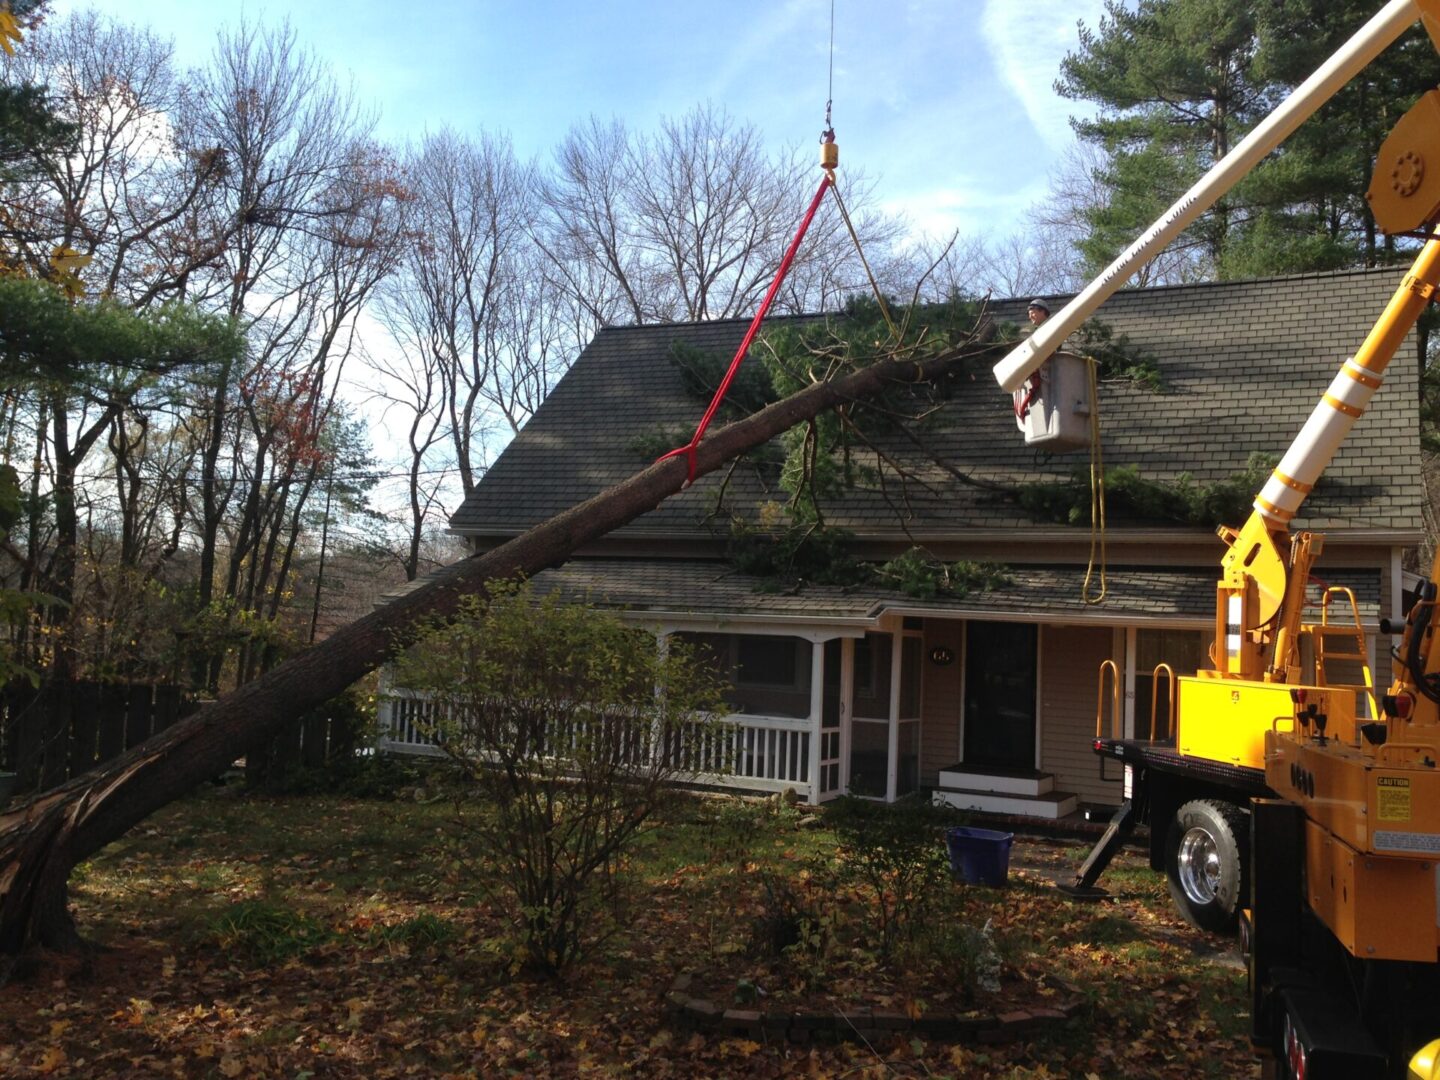 A crane is being used to remove a tree from the roof of a house.